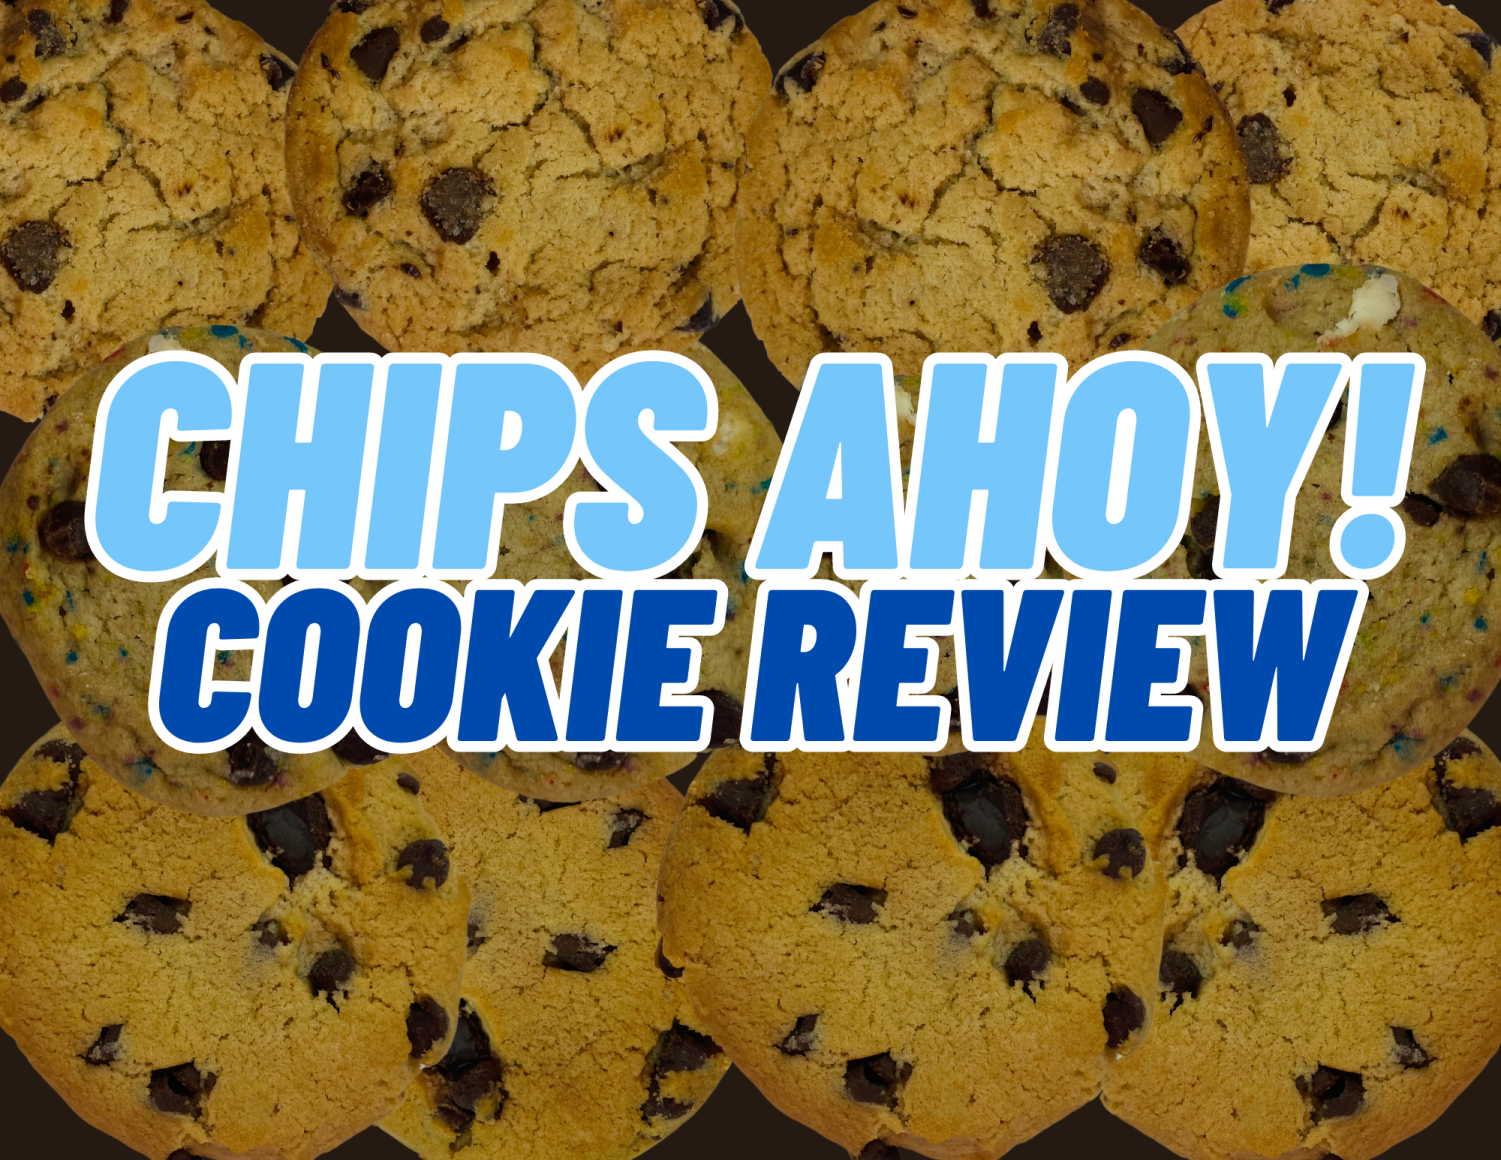 Nabisco® Chips Ahoy!® Chocolate Chip Cookies - Single Serve, Chocolate –  Office Ready